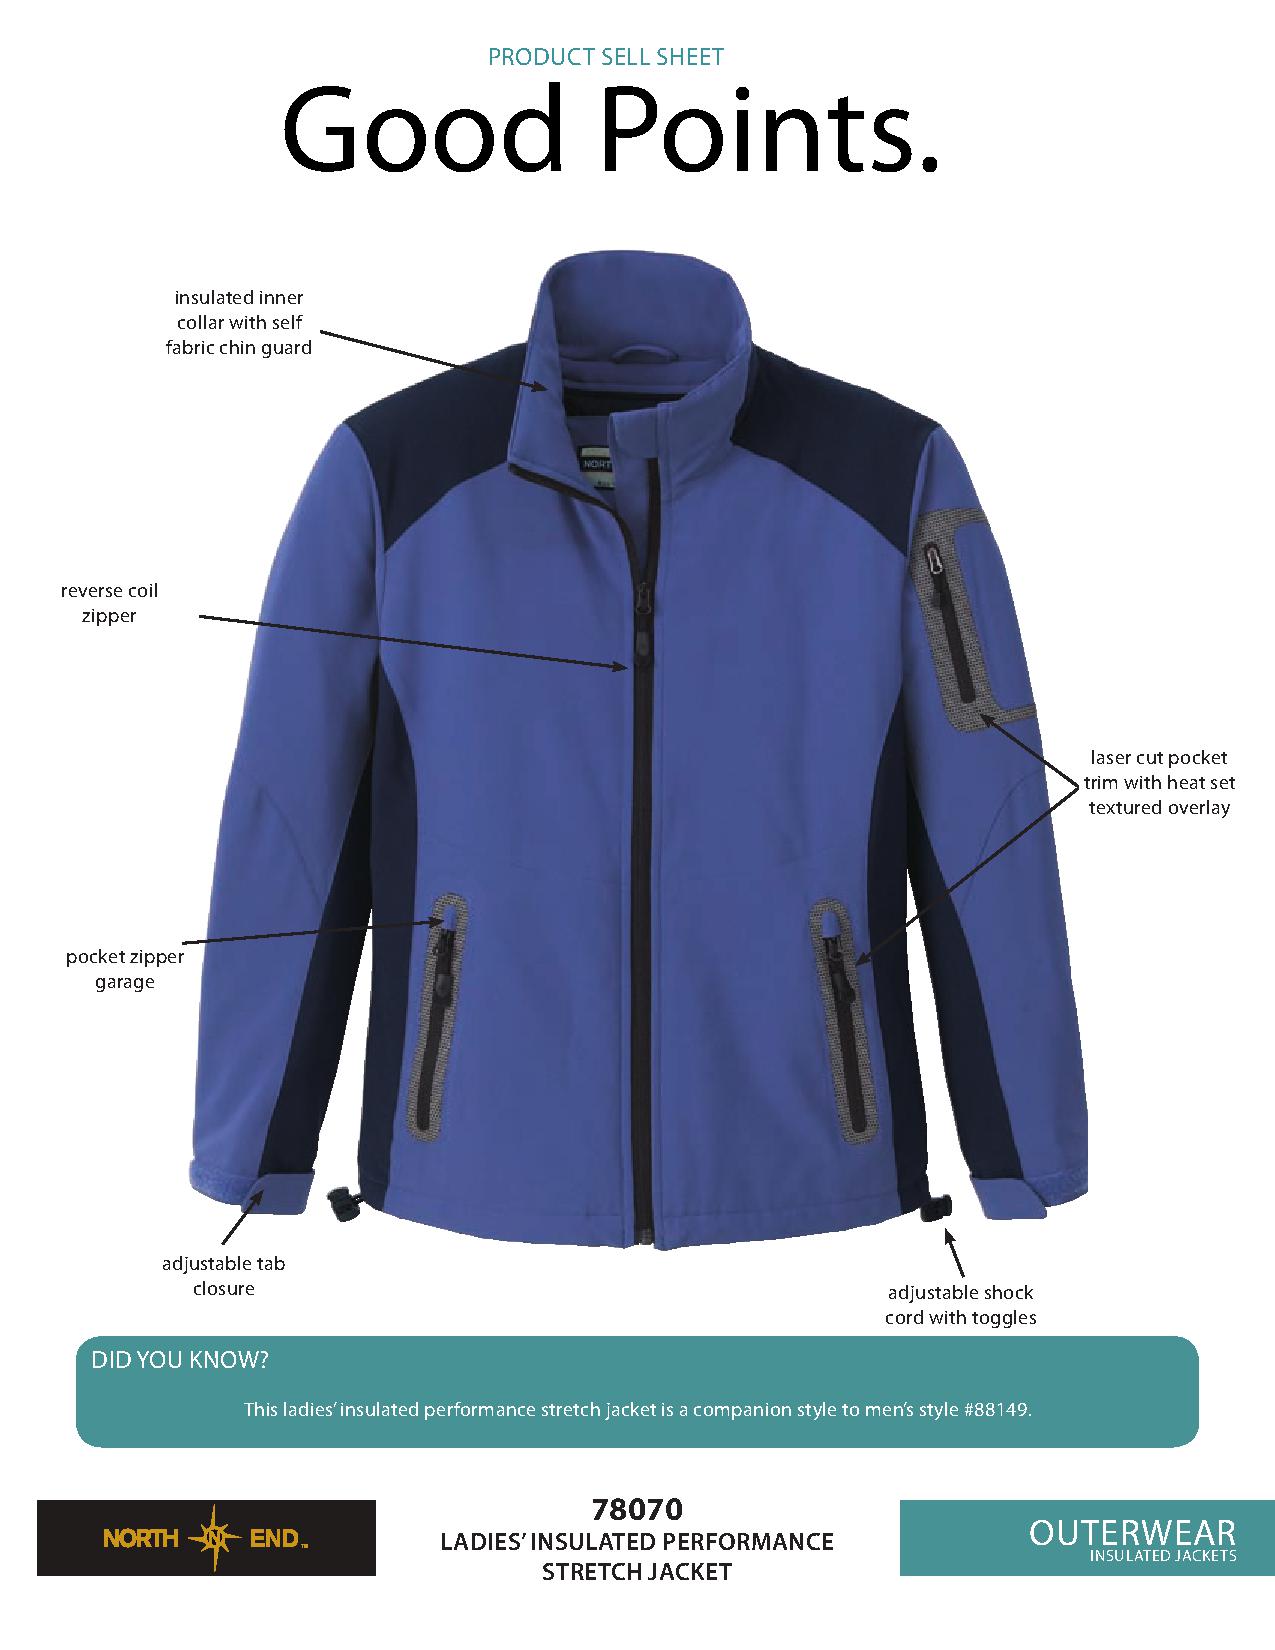 Ash City Performance Jackets 78070 - Ladies' Insulated Performance Stretch Jacket